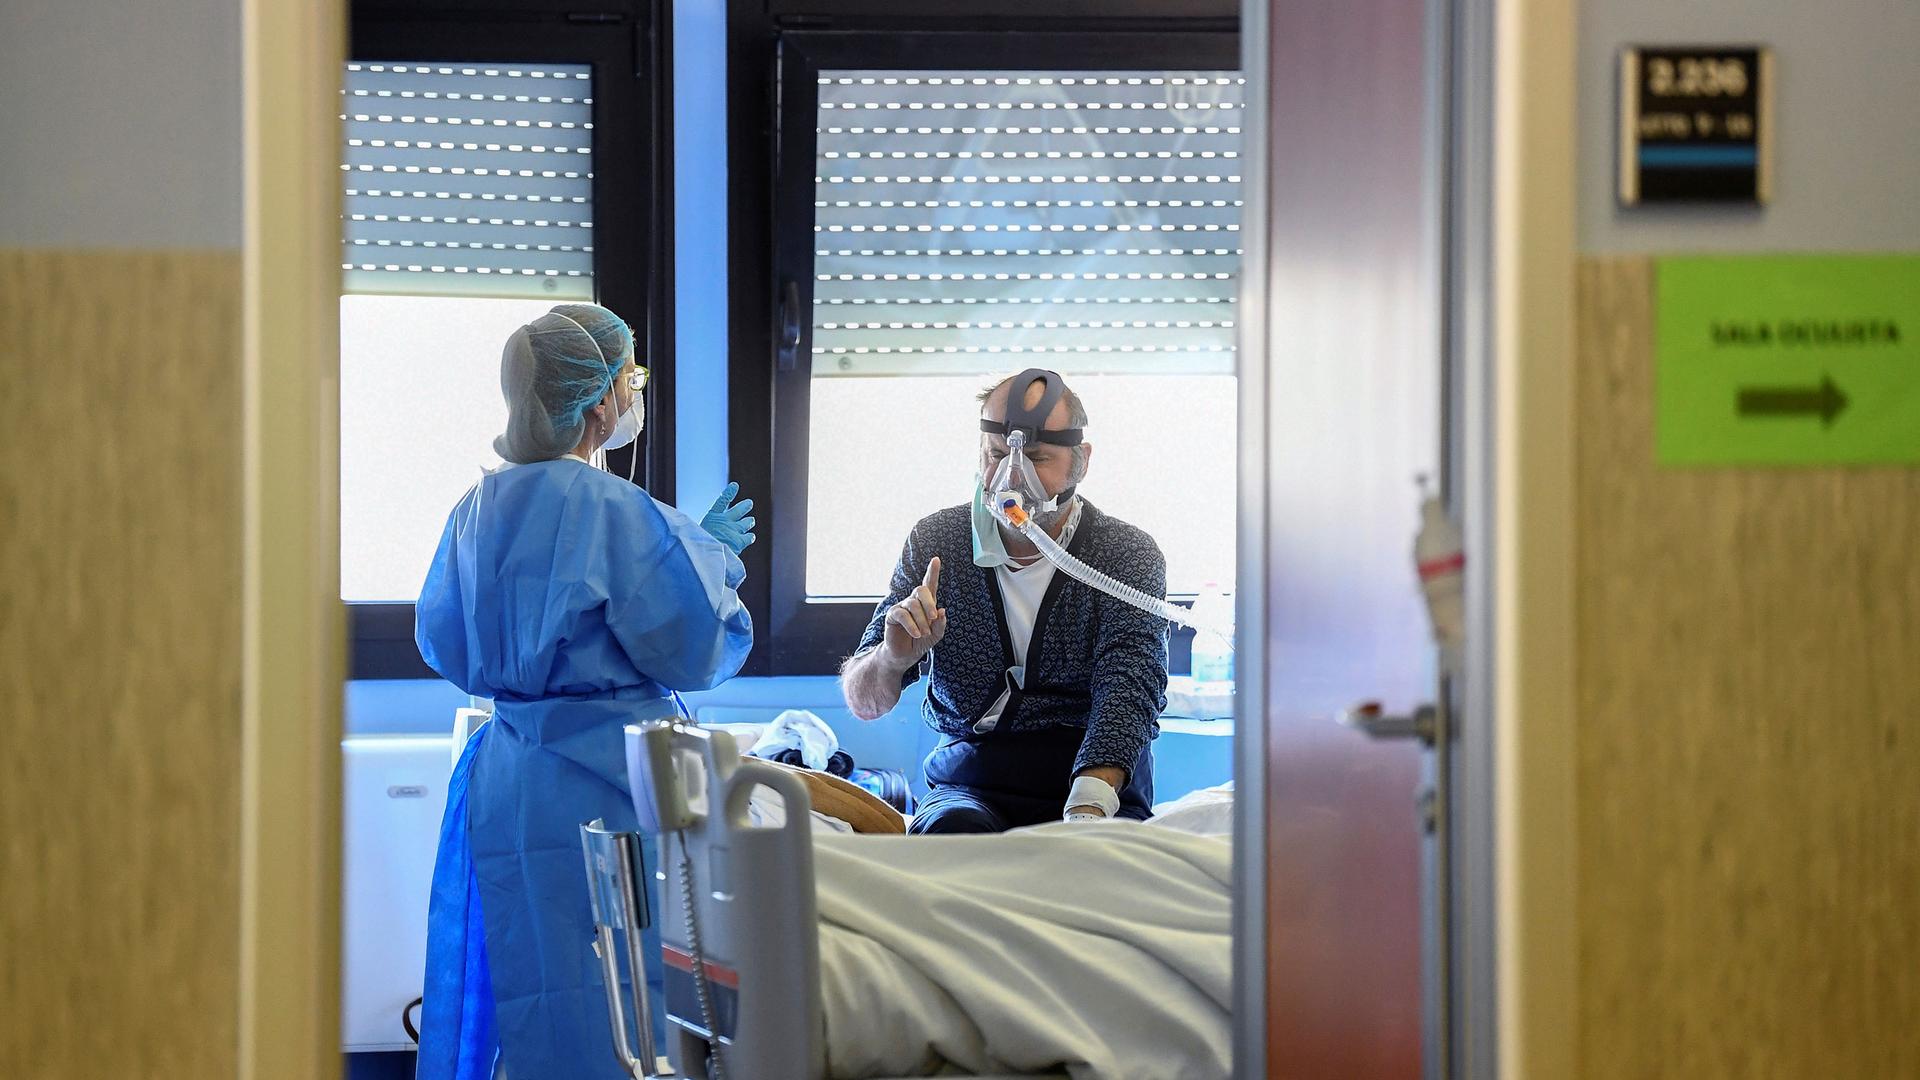 A patient is shown wearing a mask with breathing tubes connected while a medical professional stands adjacent.